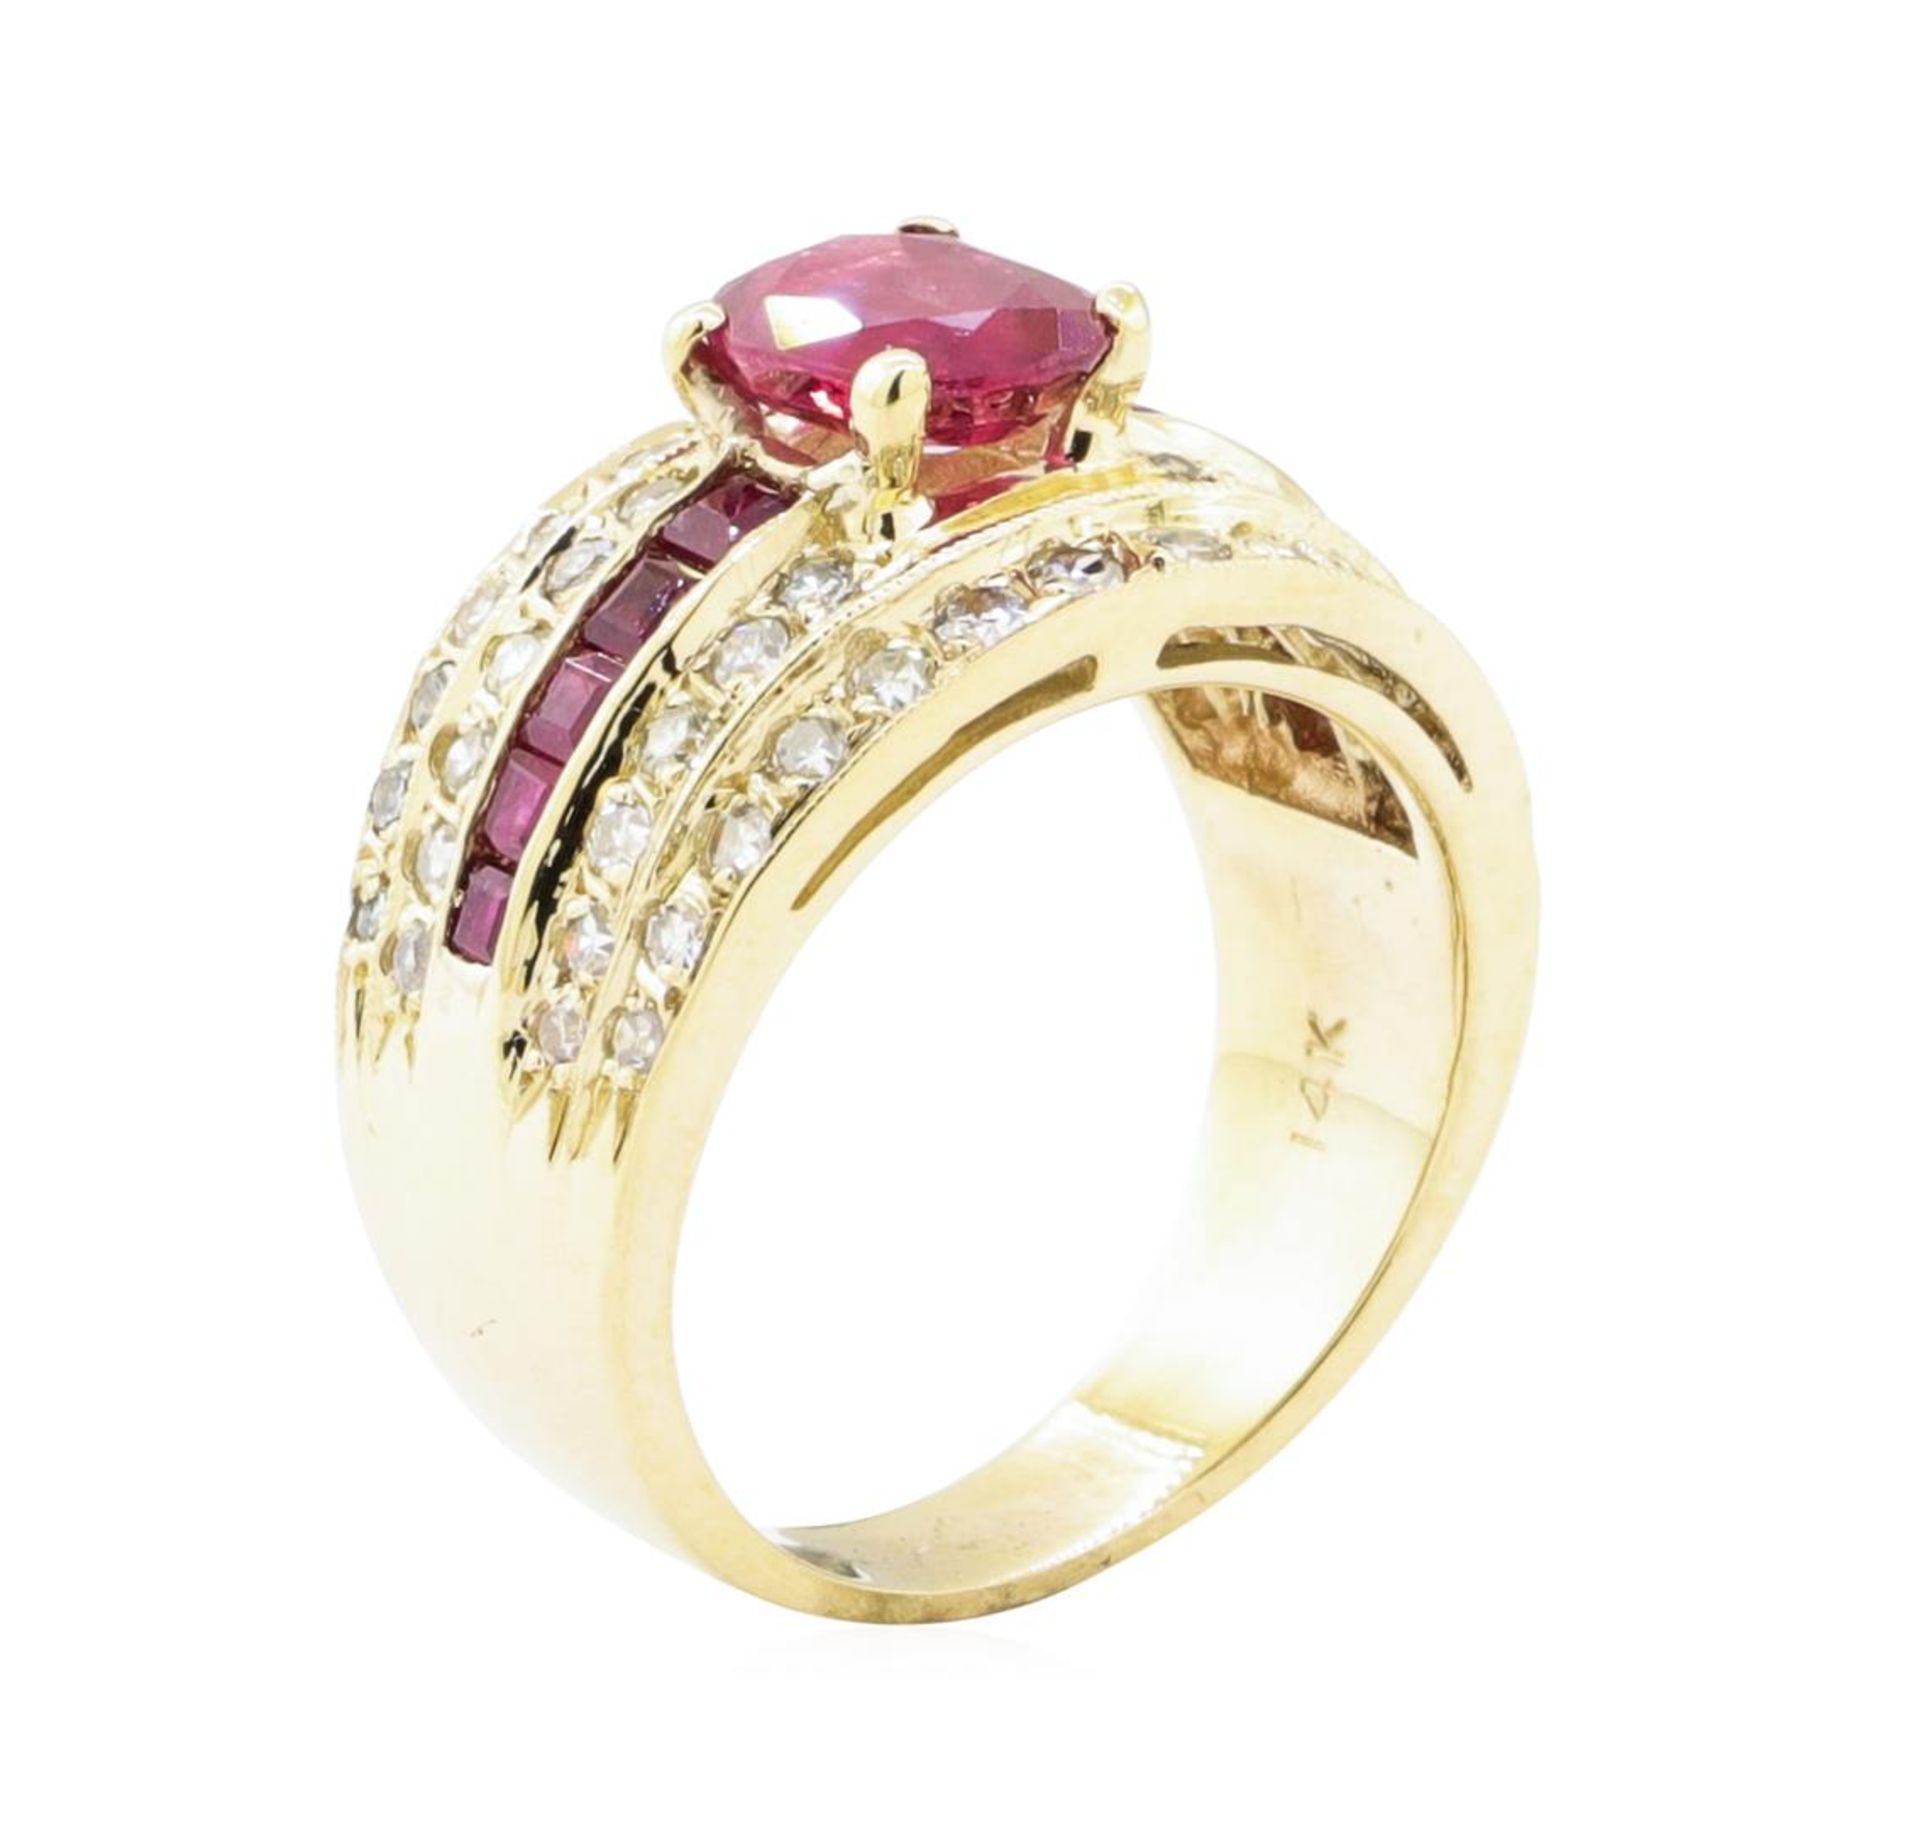 2.50 ctw Ruby and Diamond Ring - 14KT Yellow Gold - Image 4 of 5